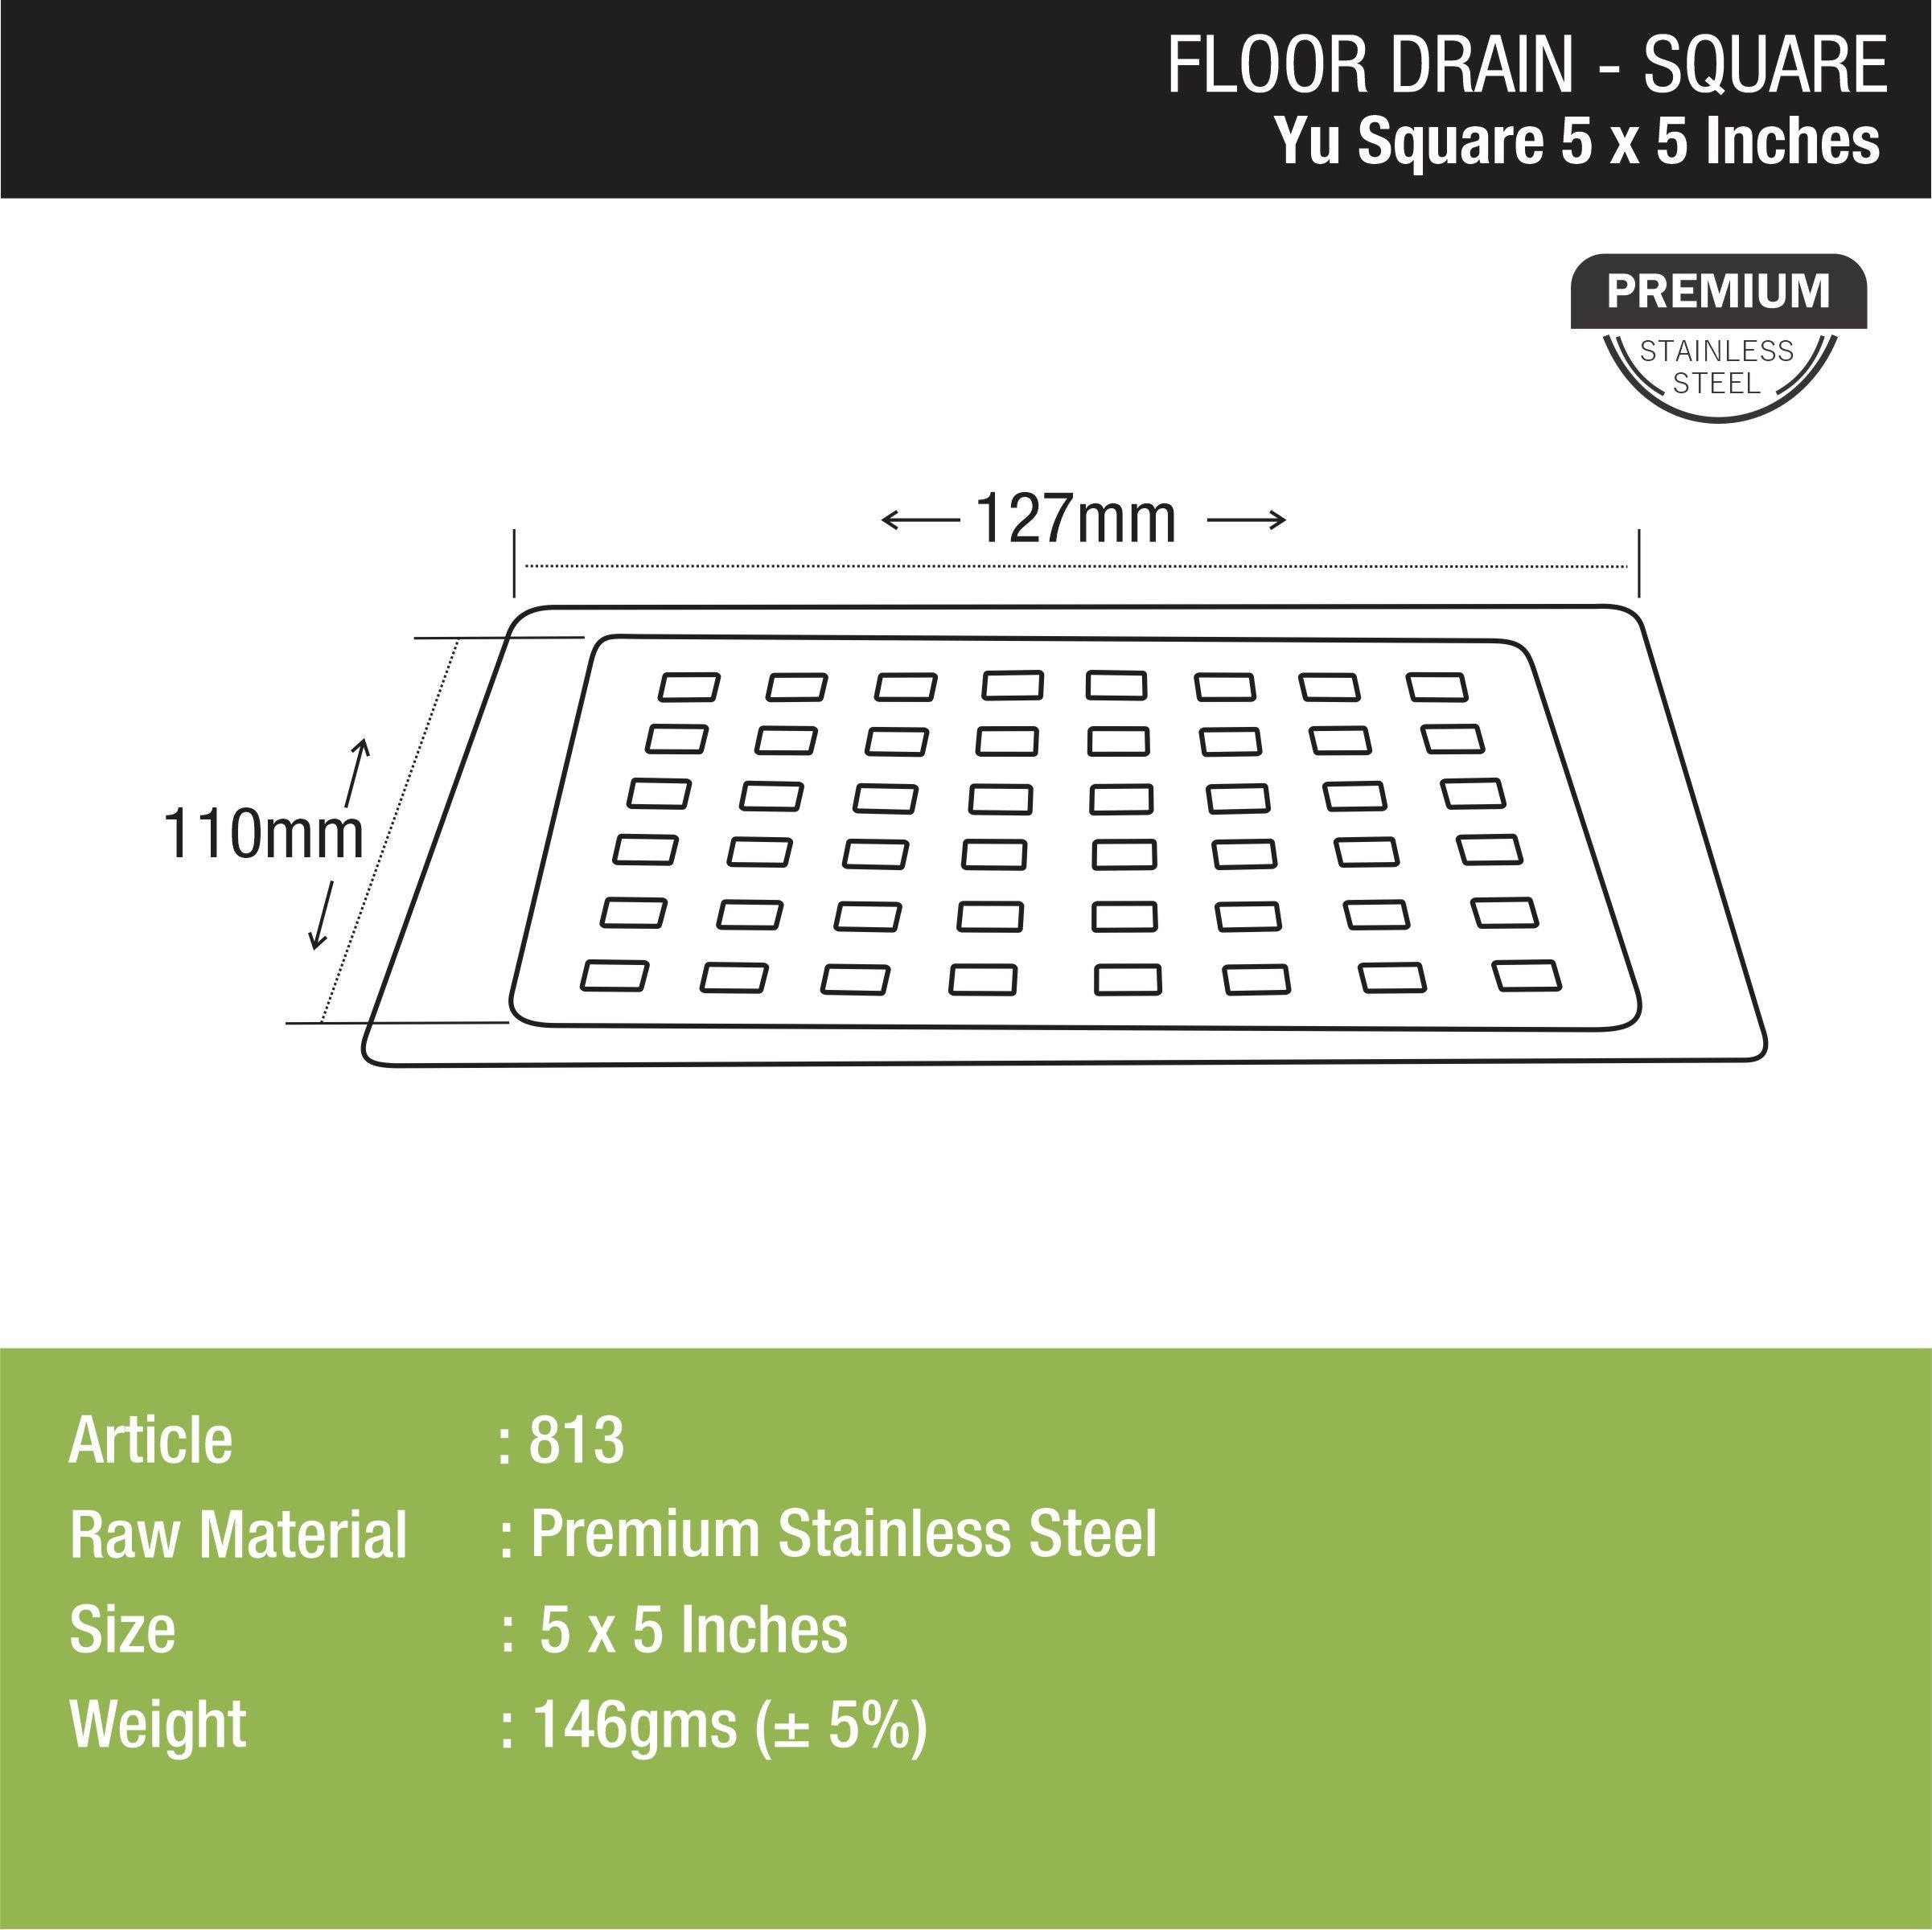 YU Square Floor Drain (5 x 5 Inches) dimensions and sizes